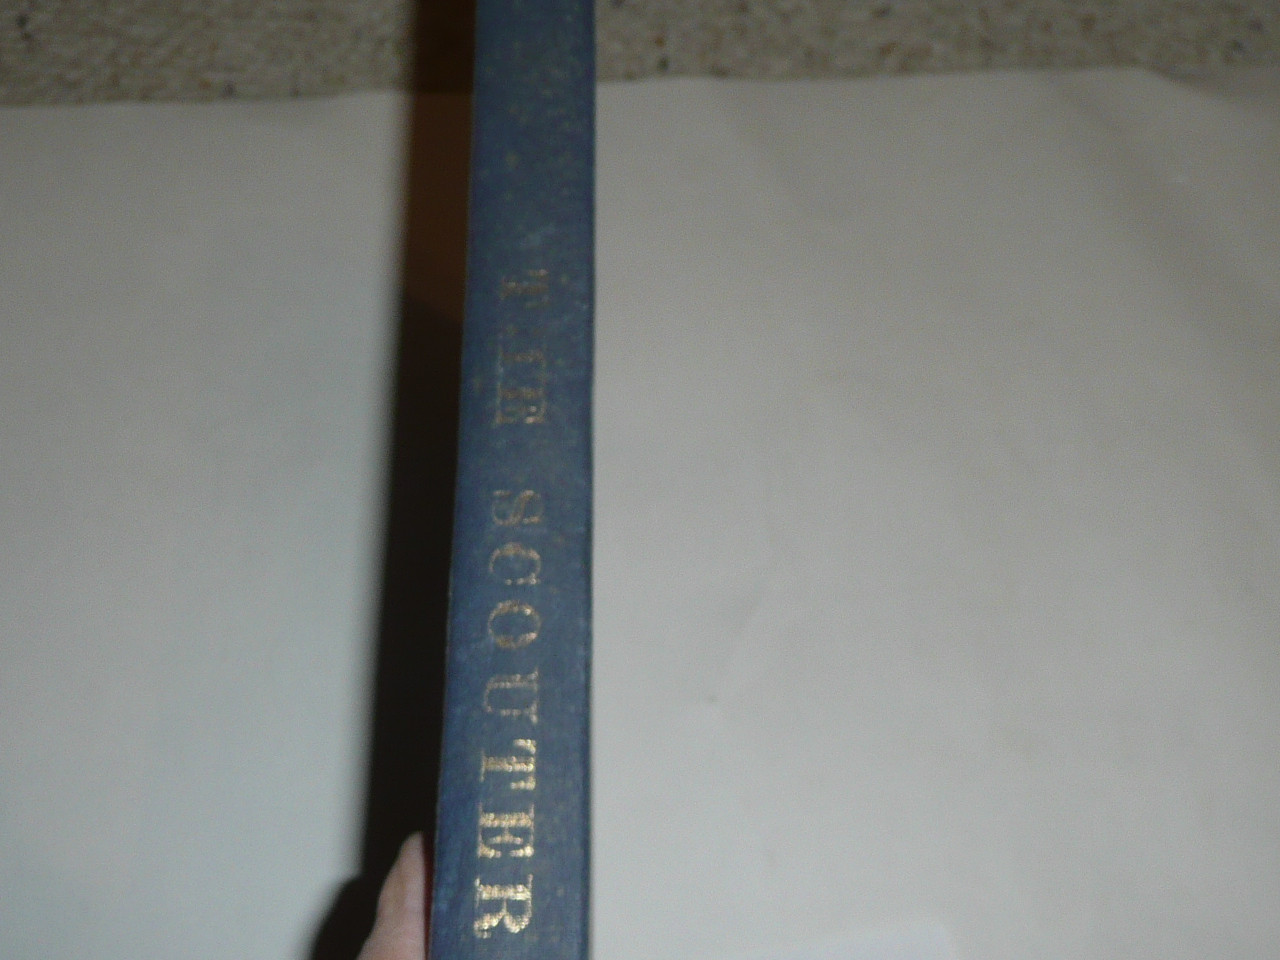 1940 Bound volume of "The Scouter", United Kingdom Scout Leader Magazine, water damage to covers only